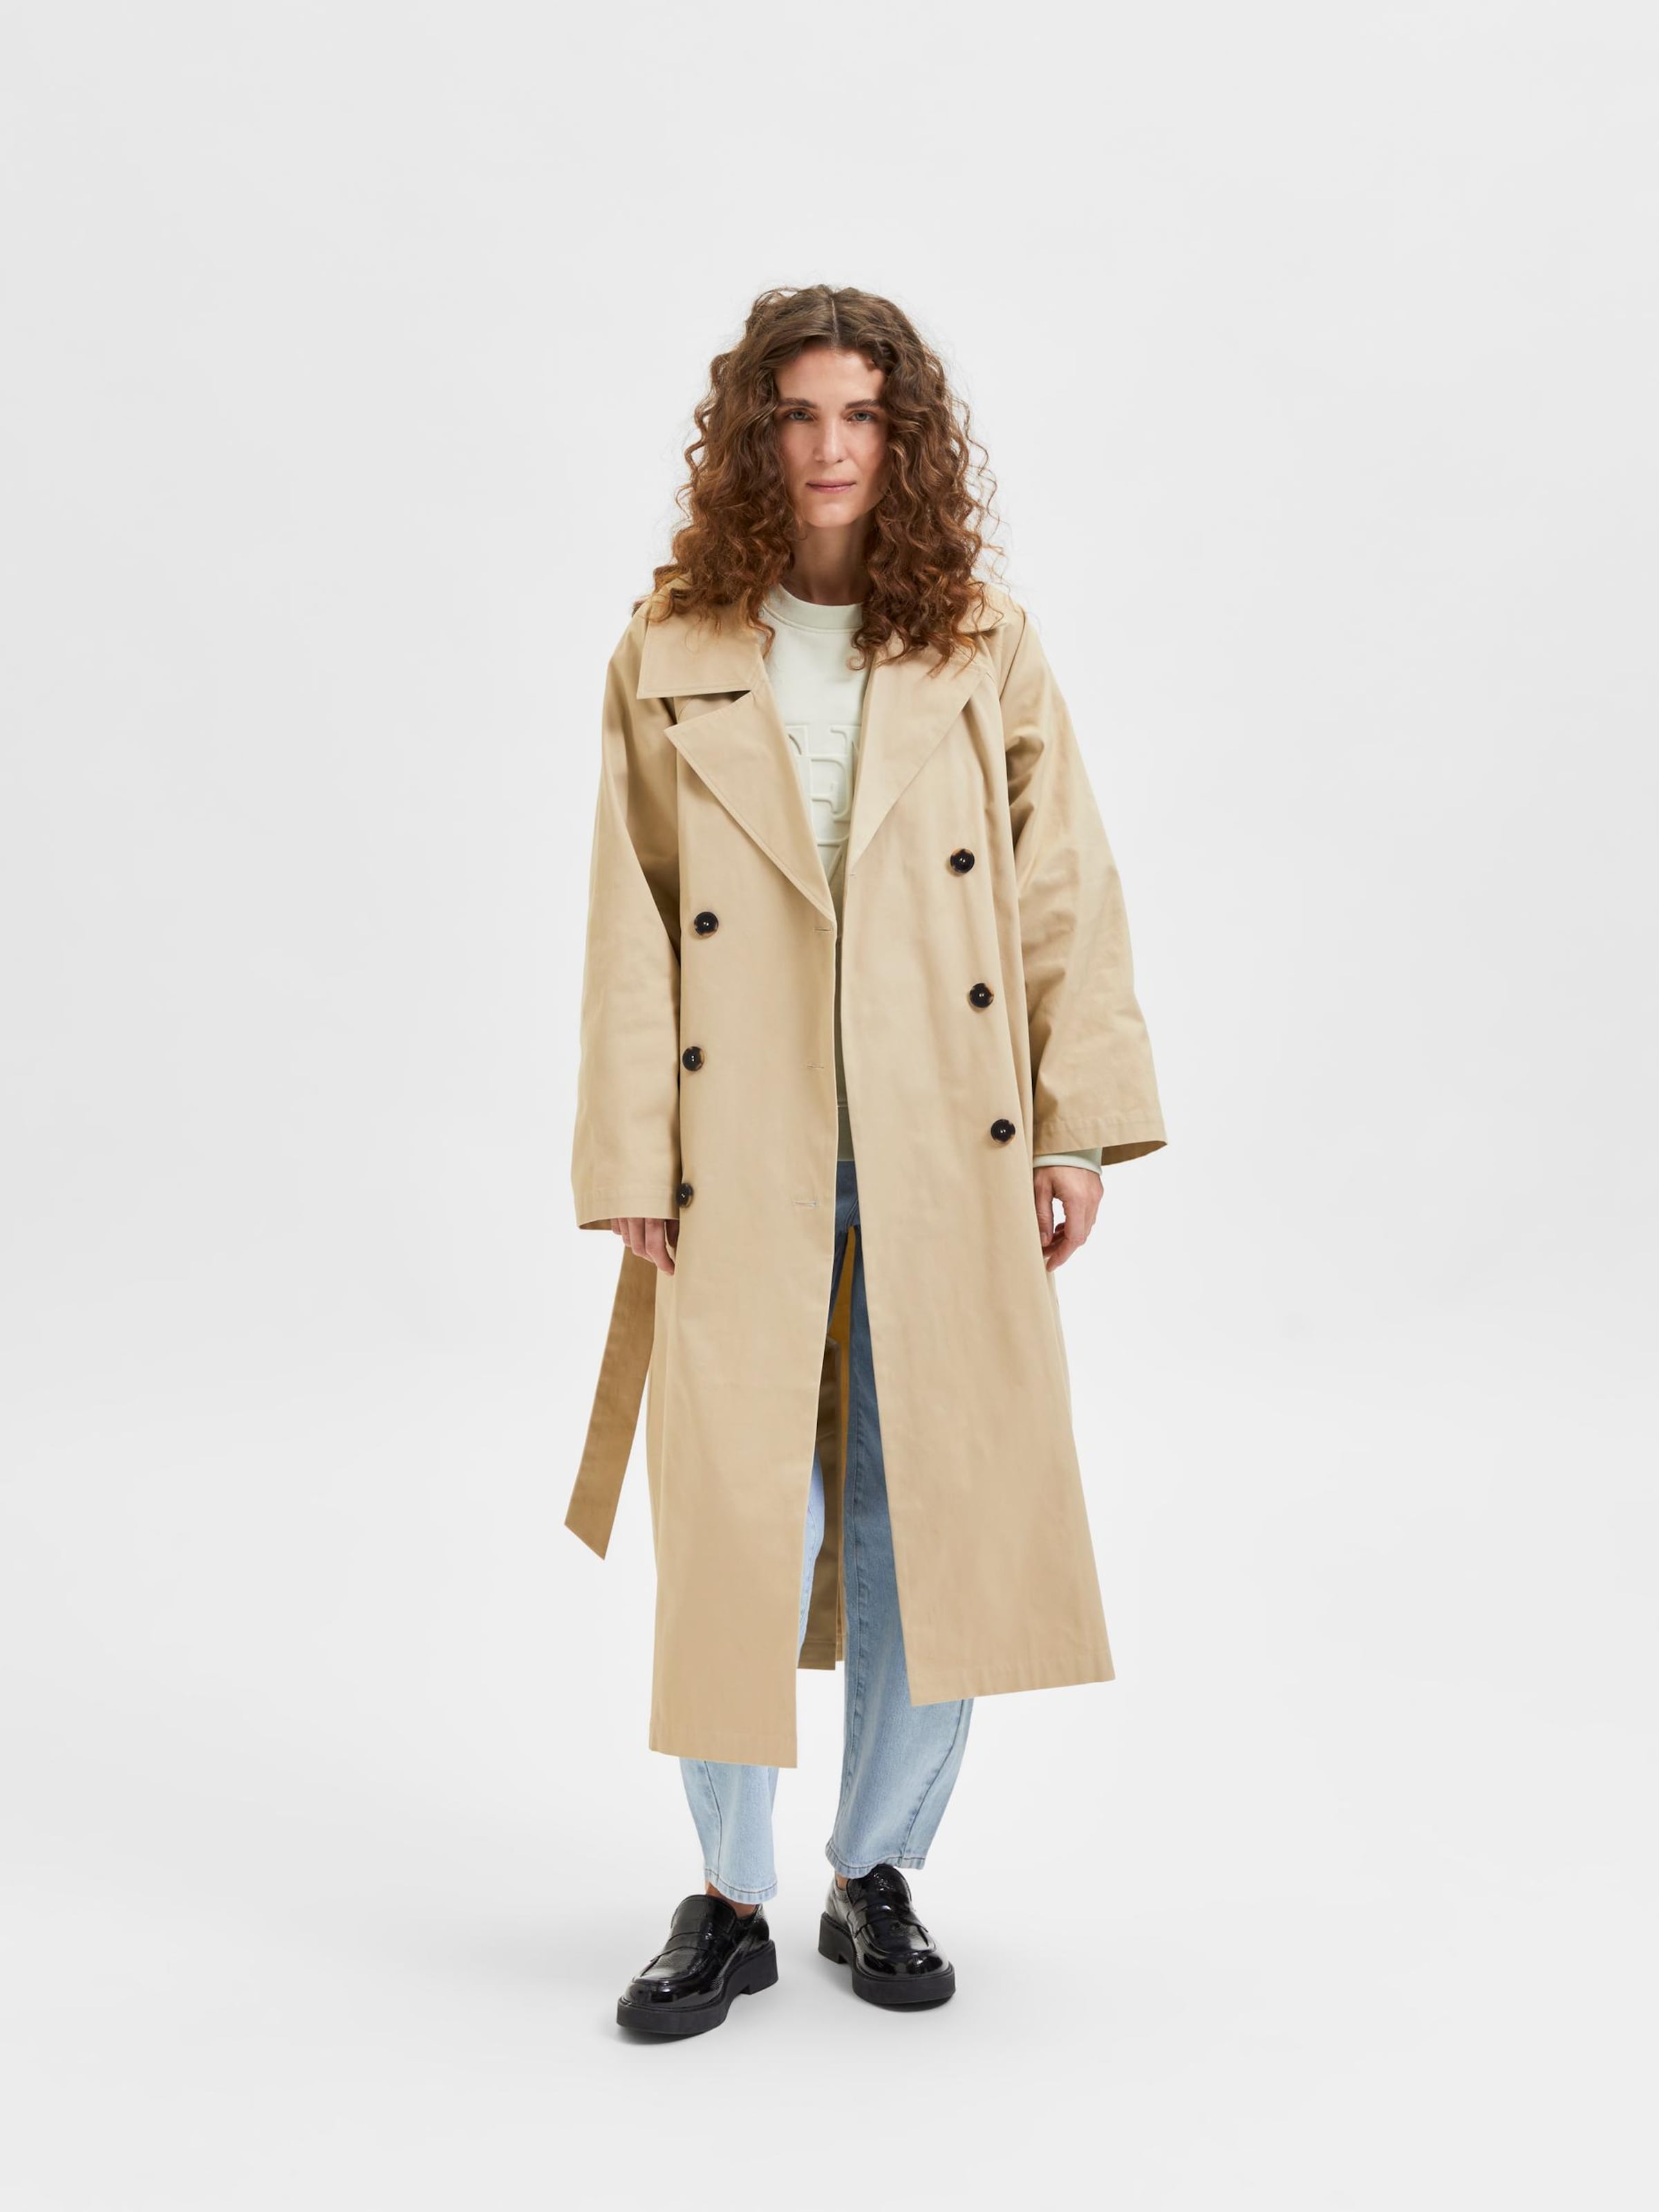 Women's TRENCH - buy online | The Founded